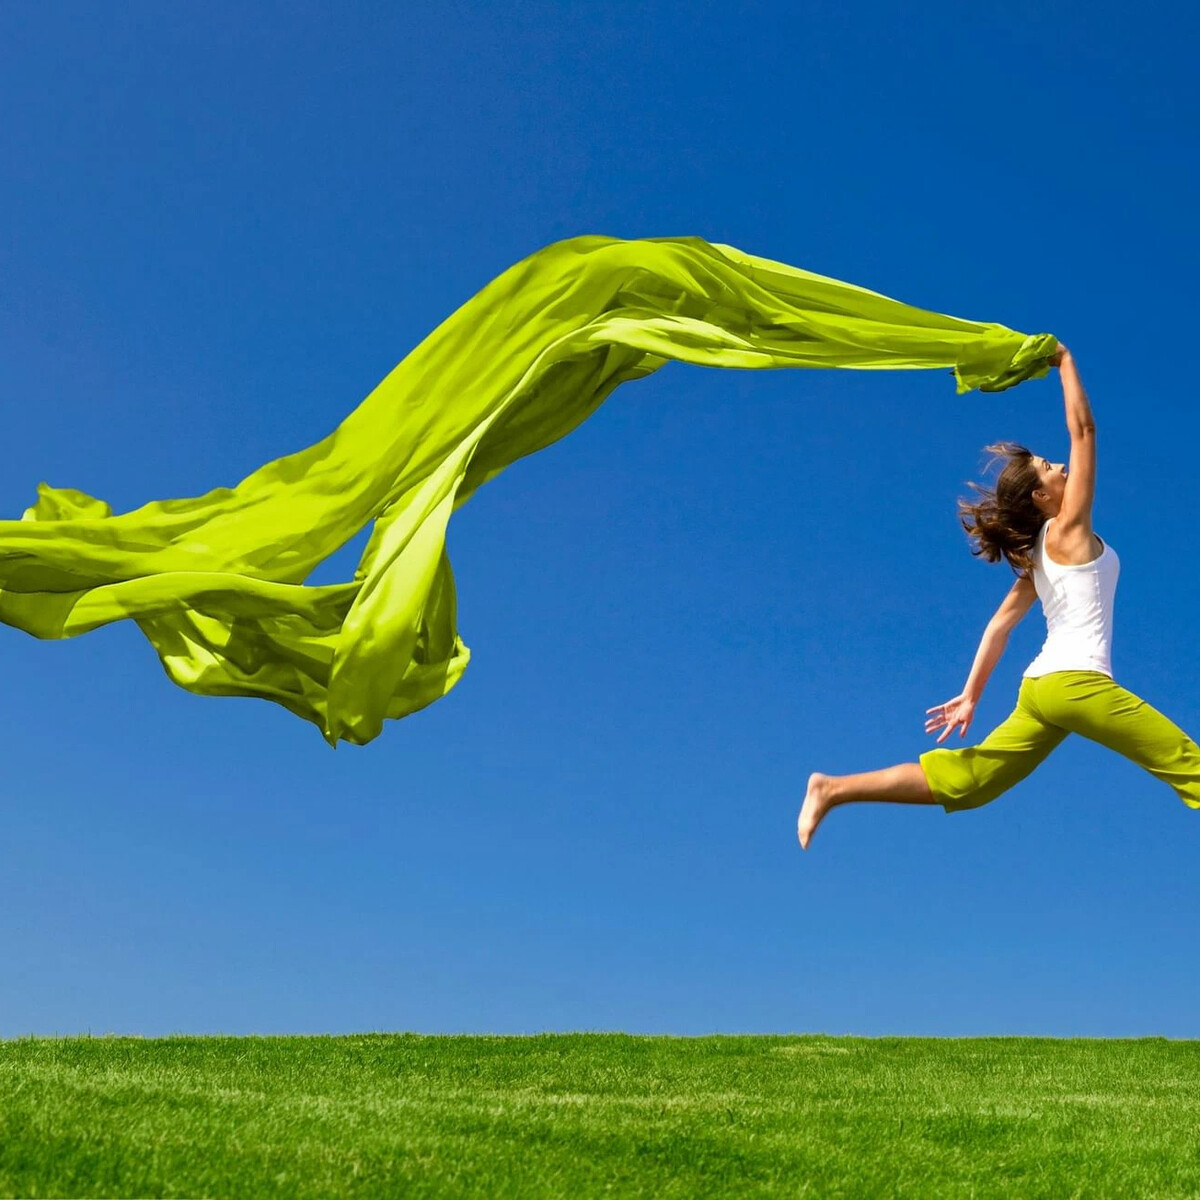 A person jumping and holding a green flowy fabric